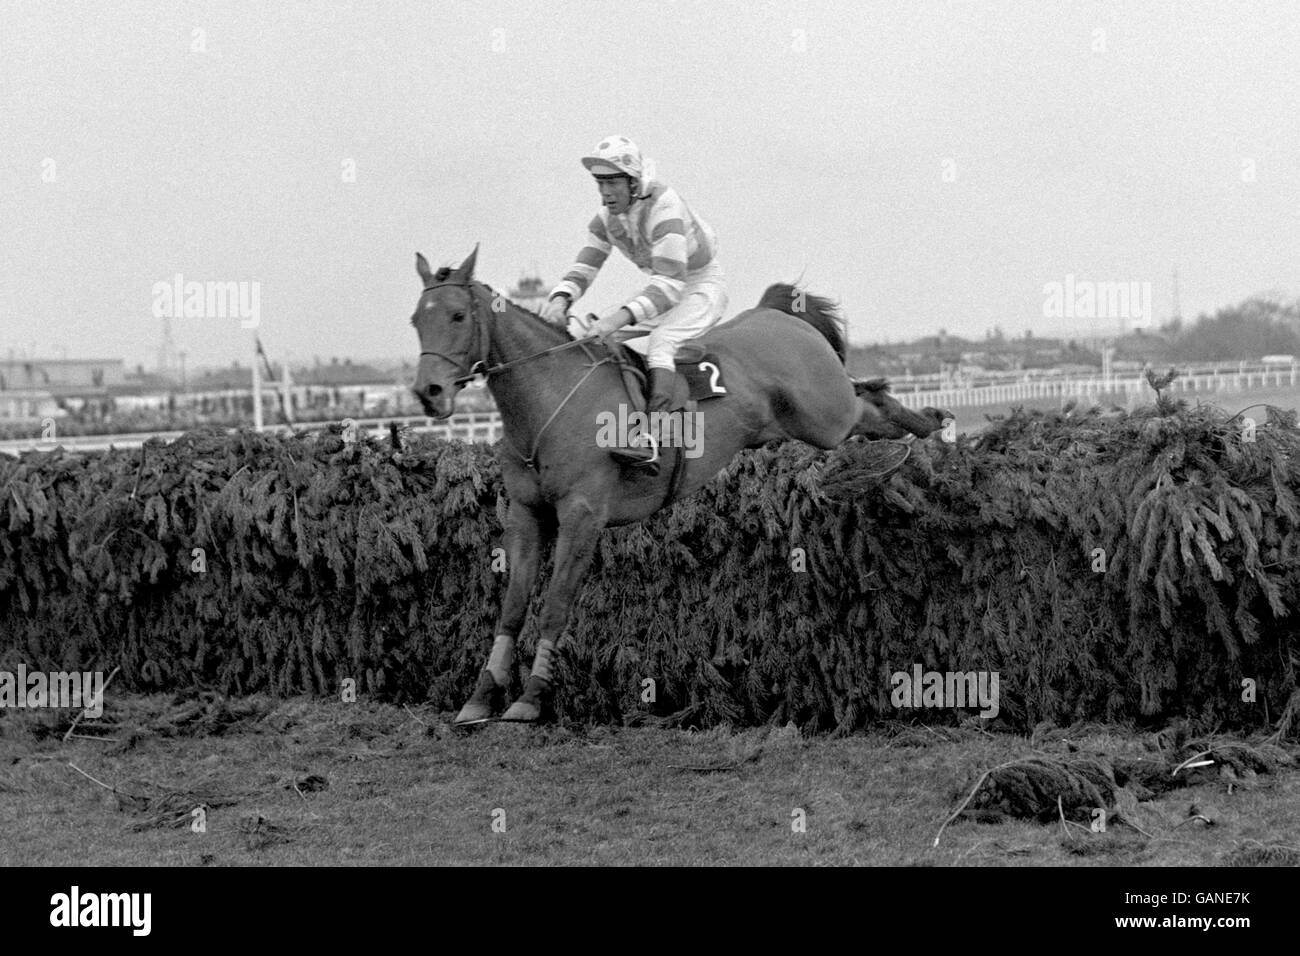 Gay Trip, Pat Taaffe up, clears the last fence before galloping on to win the National Stock Photo